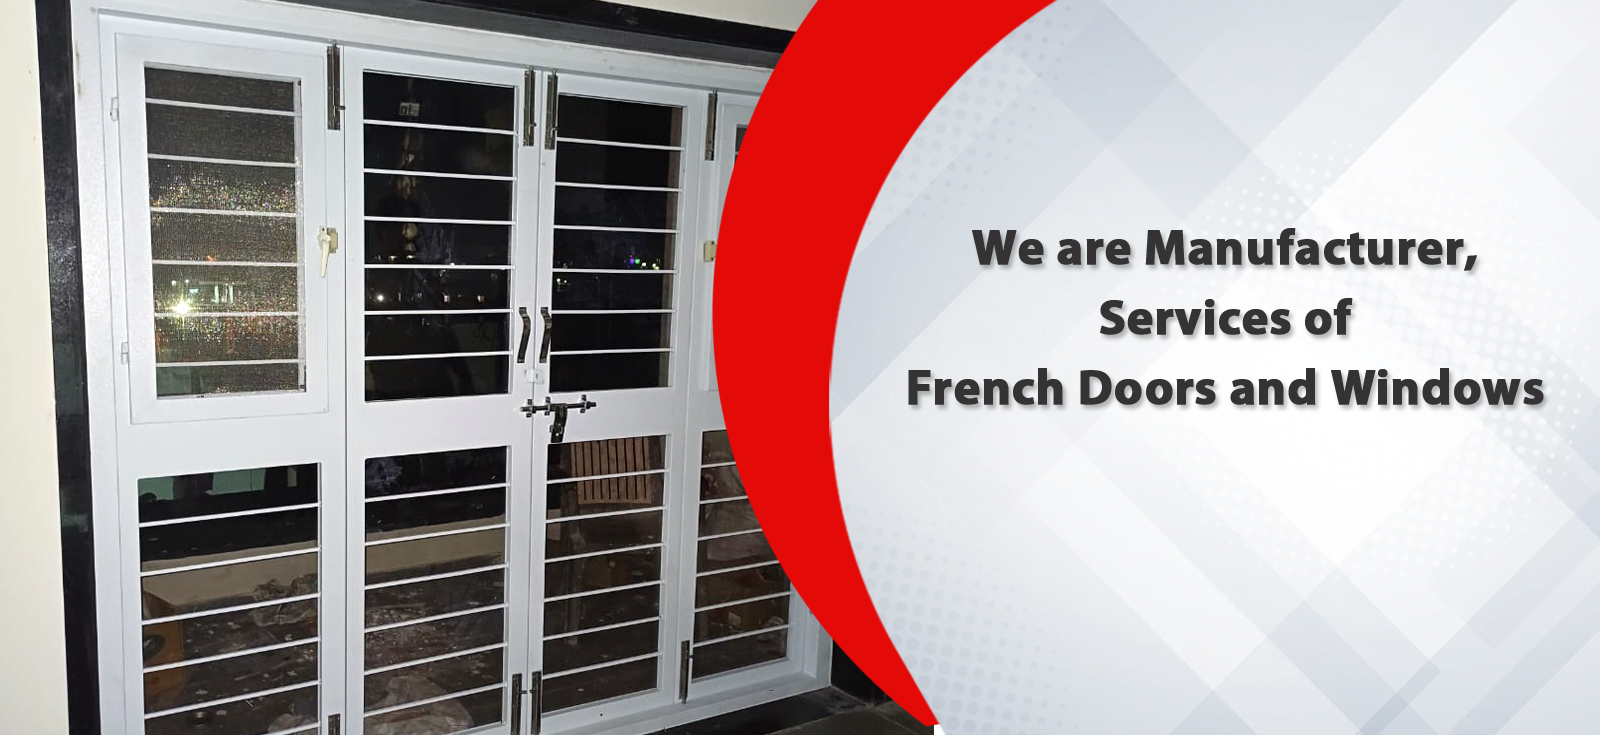 We are Manufacturer, Services of French Doors and Windows